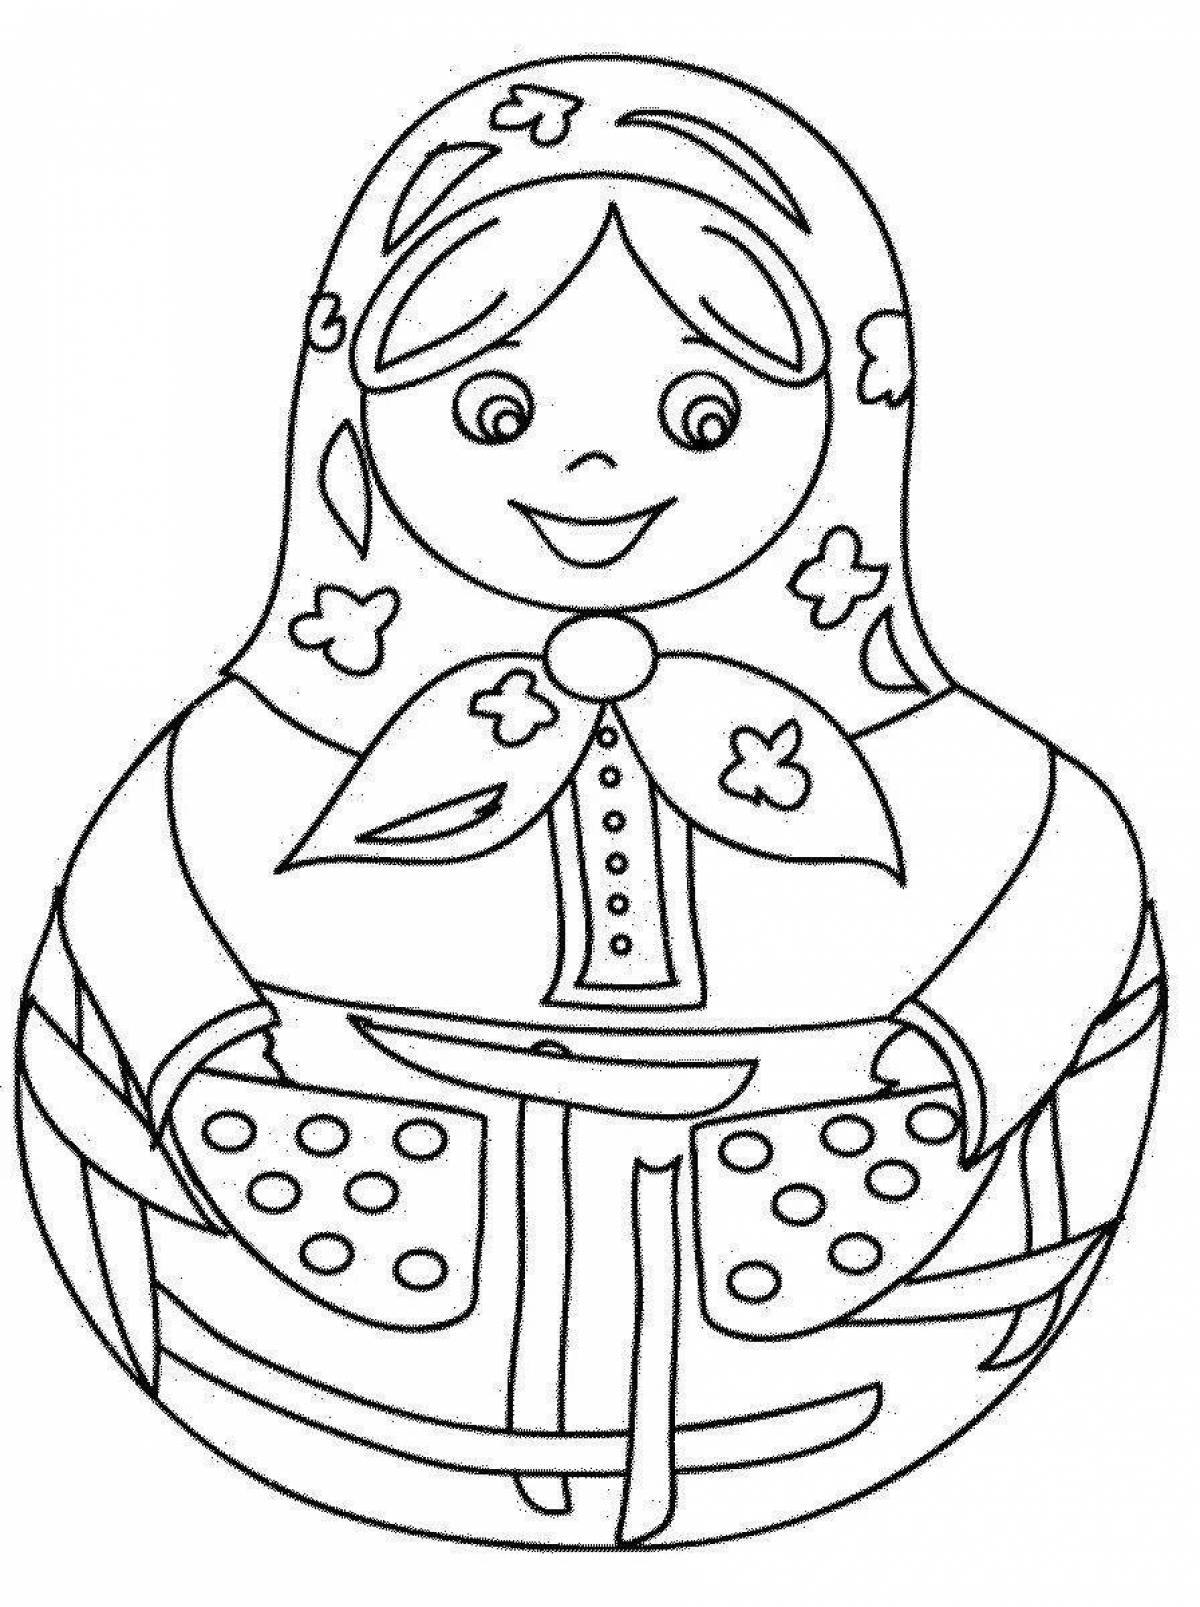 Live matryoshka coloring book for the little ones